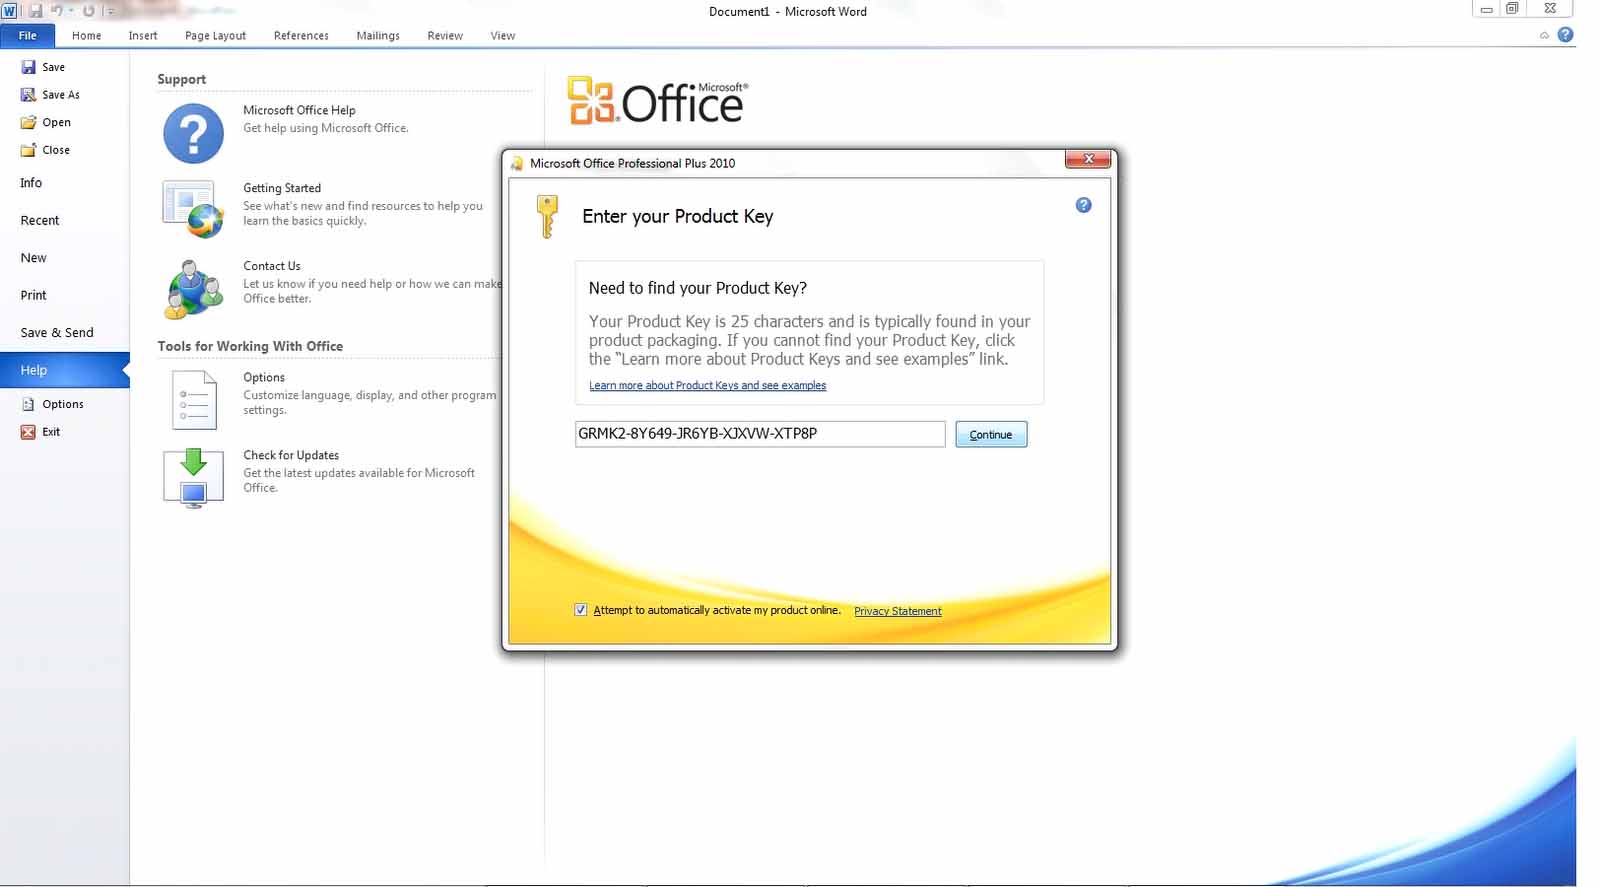 office 2010 professional for mac